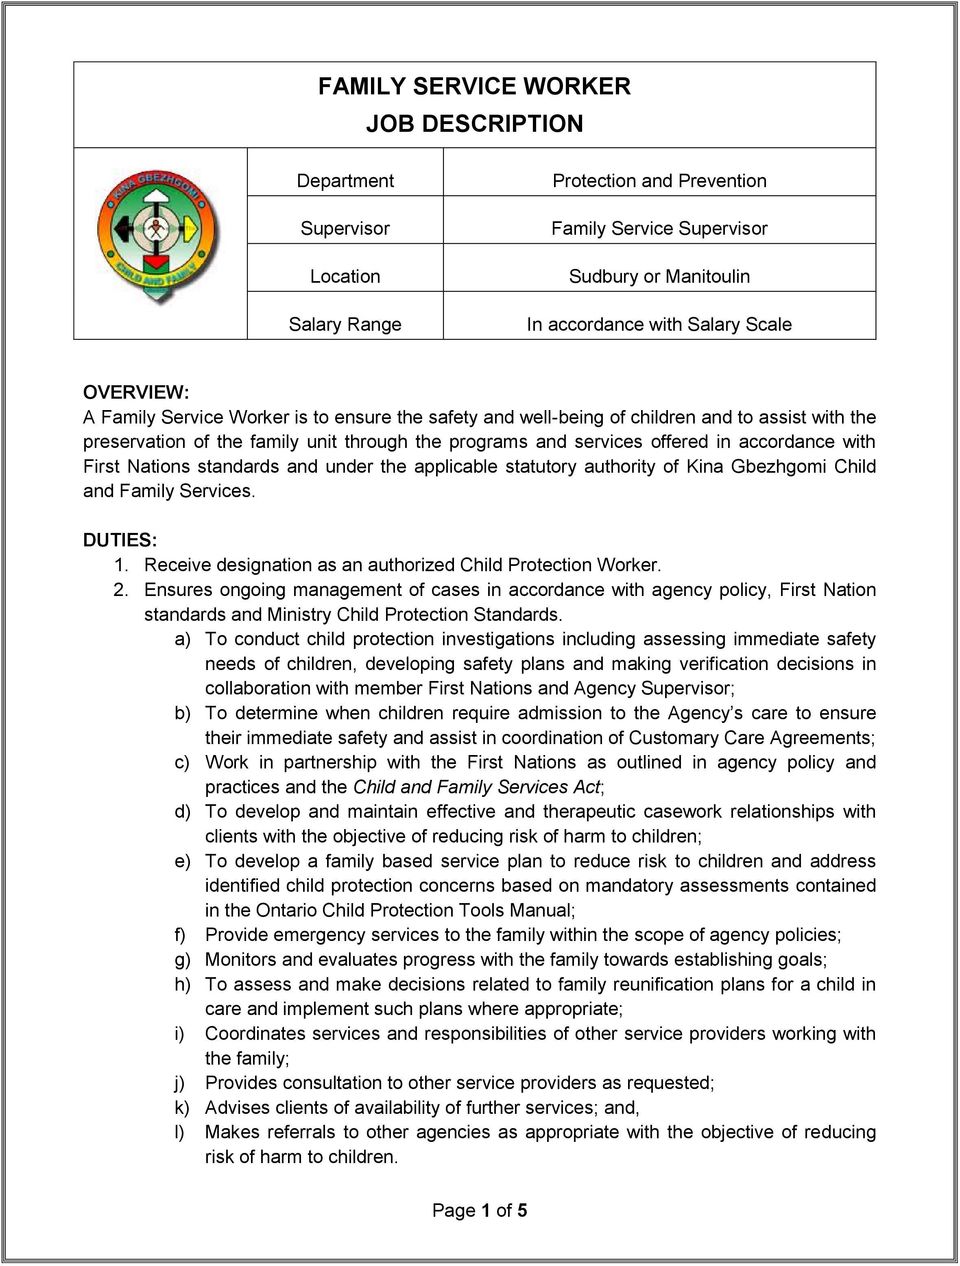 Nations standards and under the applicable statutory authority of Kina Gbezhgomi Child and Family Services. DUTIES: 1. Receive designation as an authorized Child Protection Worker. 2.